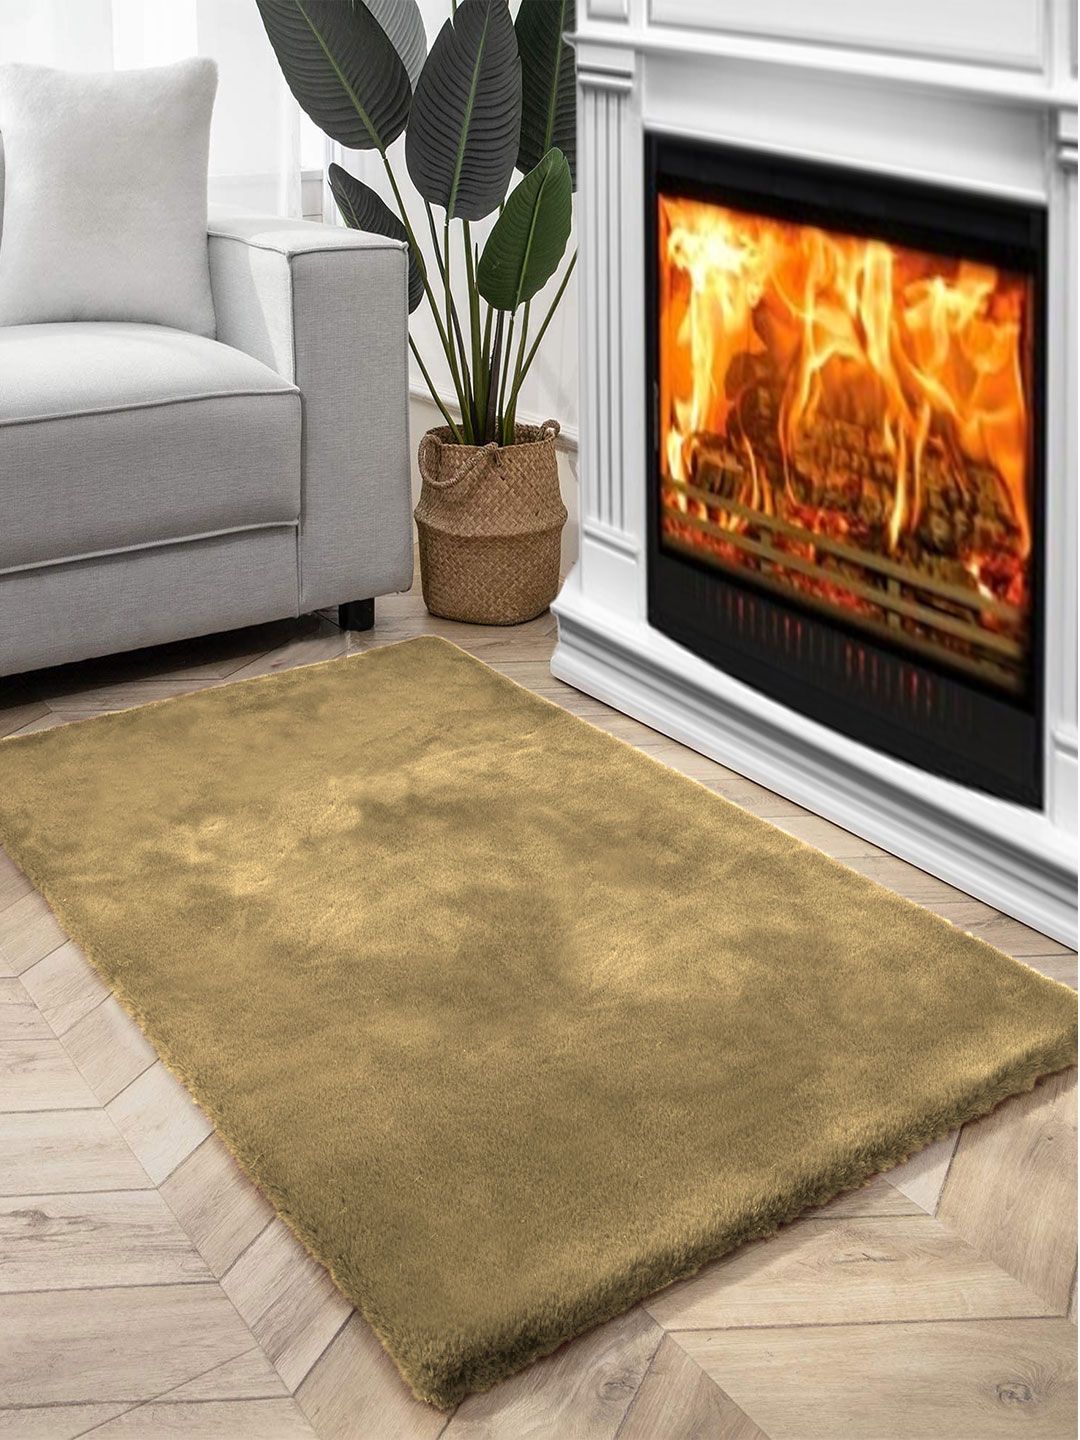 FI Beige Polycotton Solid Bath Rugs Price in India